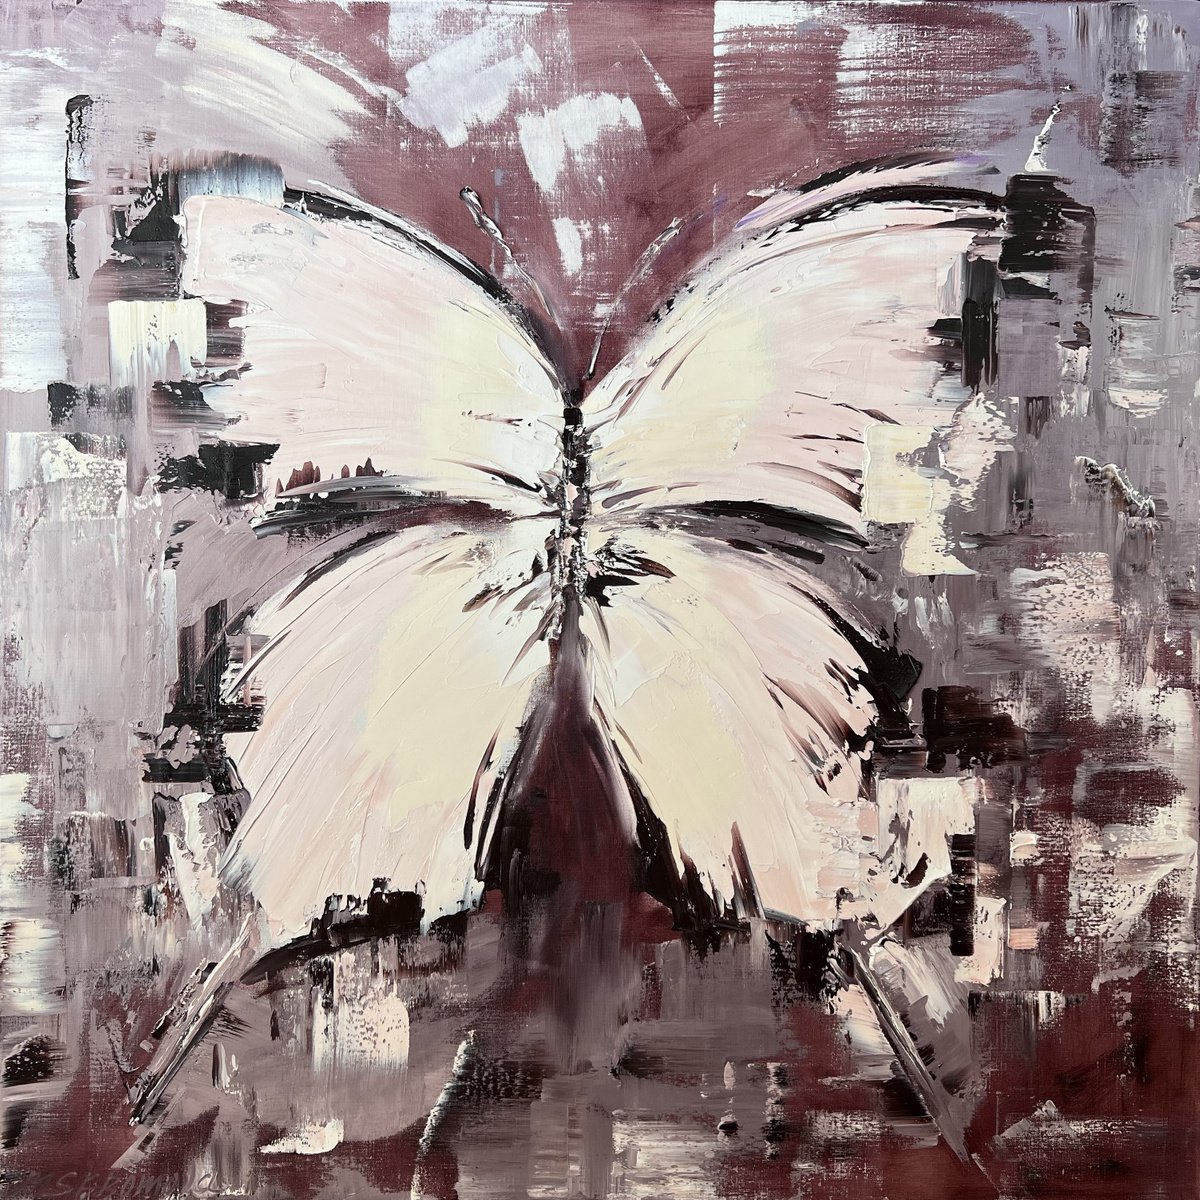 GHOST ZEN - Abstract butterfly. Butterfly Delight. by Marina Skromova